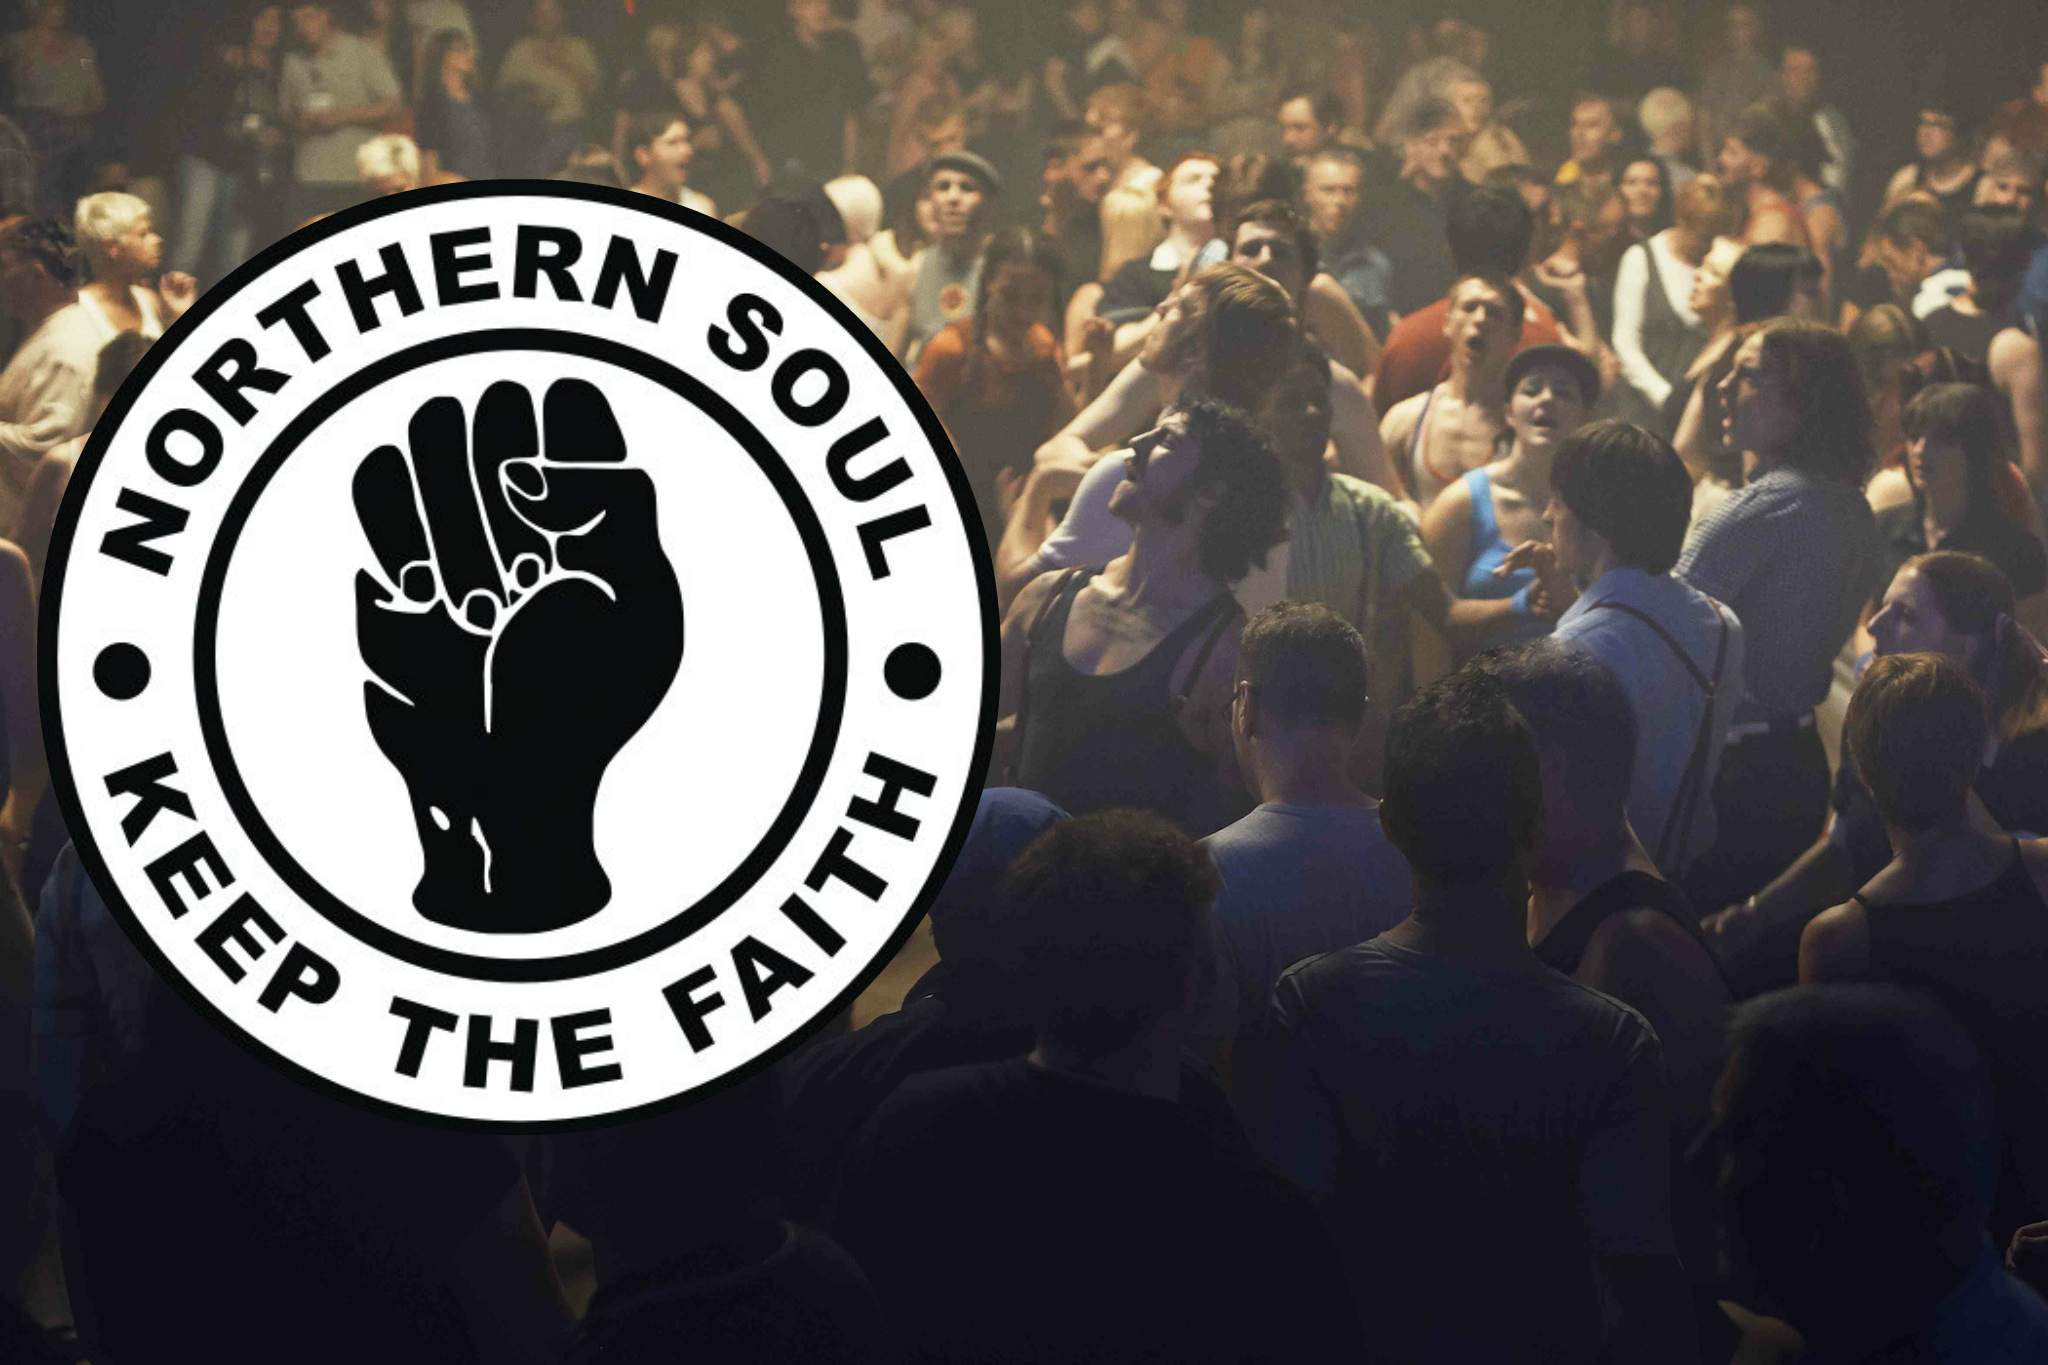 Northern Soul Music: What is it? Where did it originate?